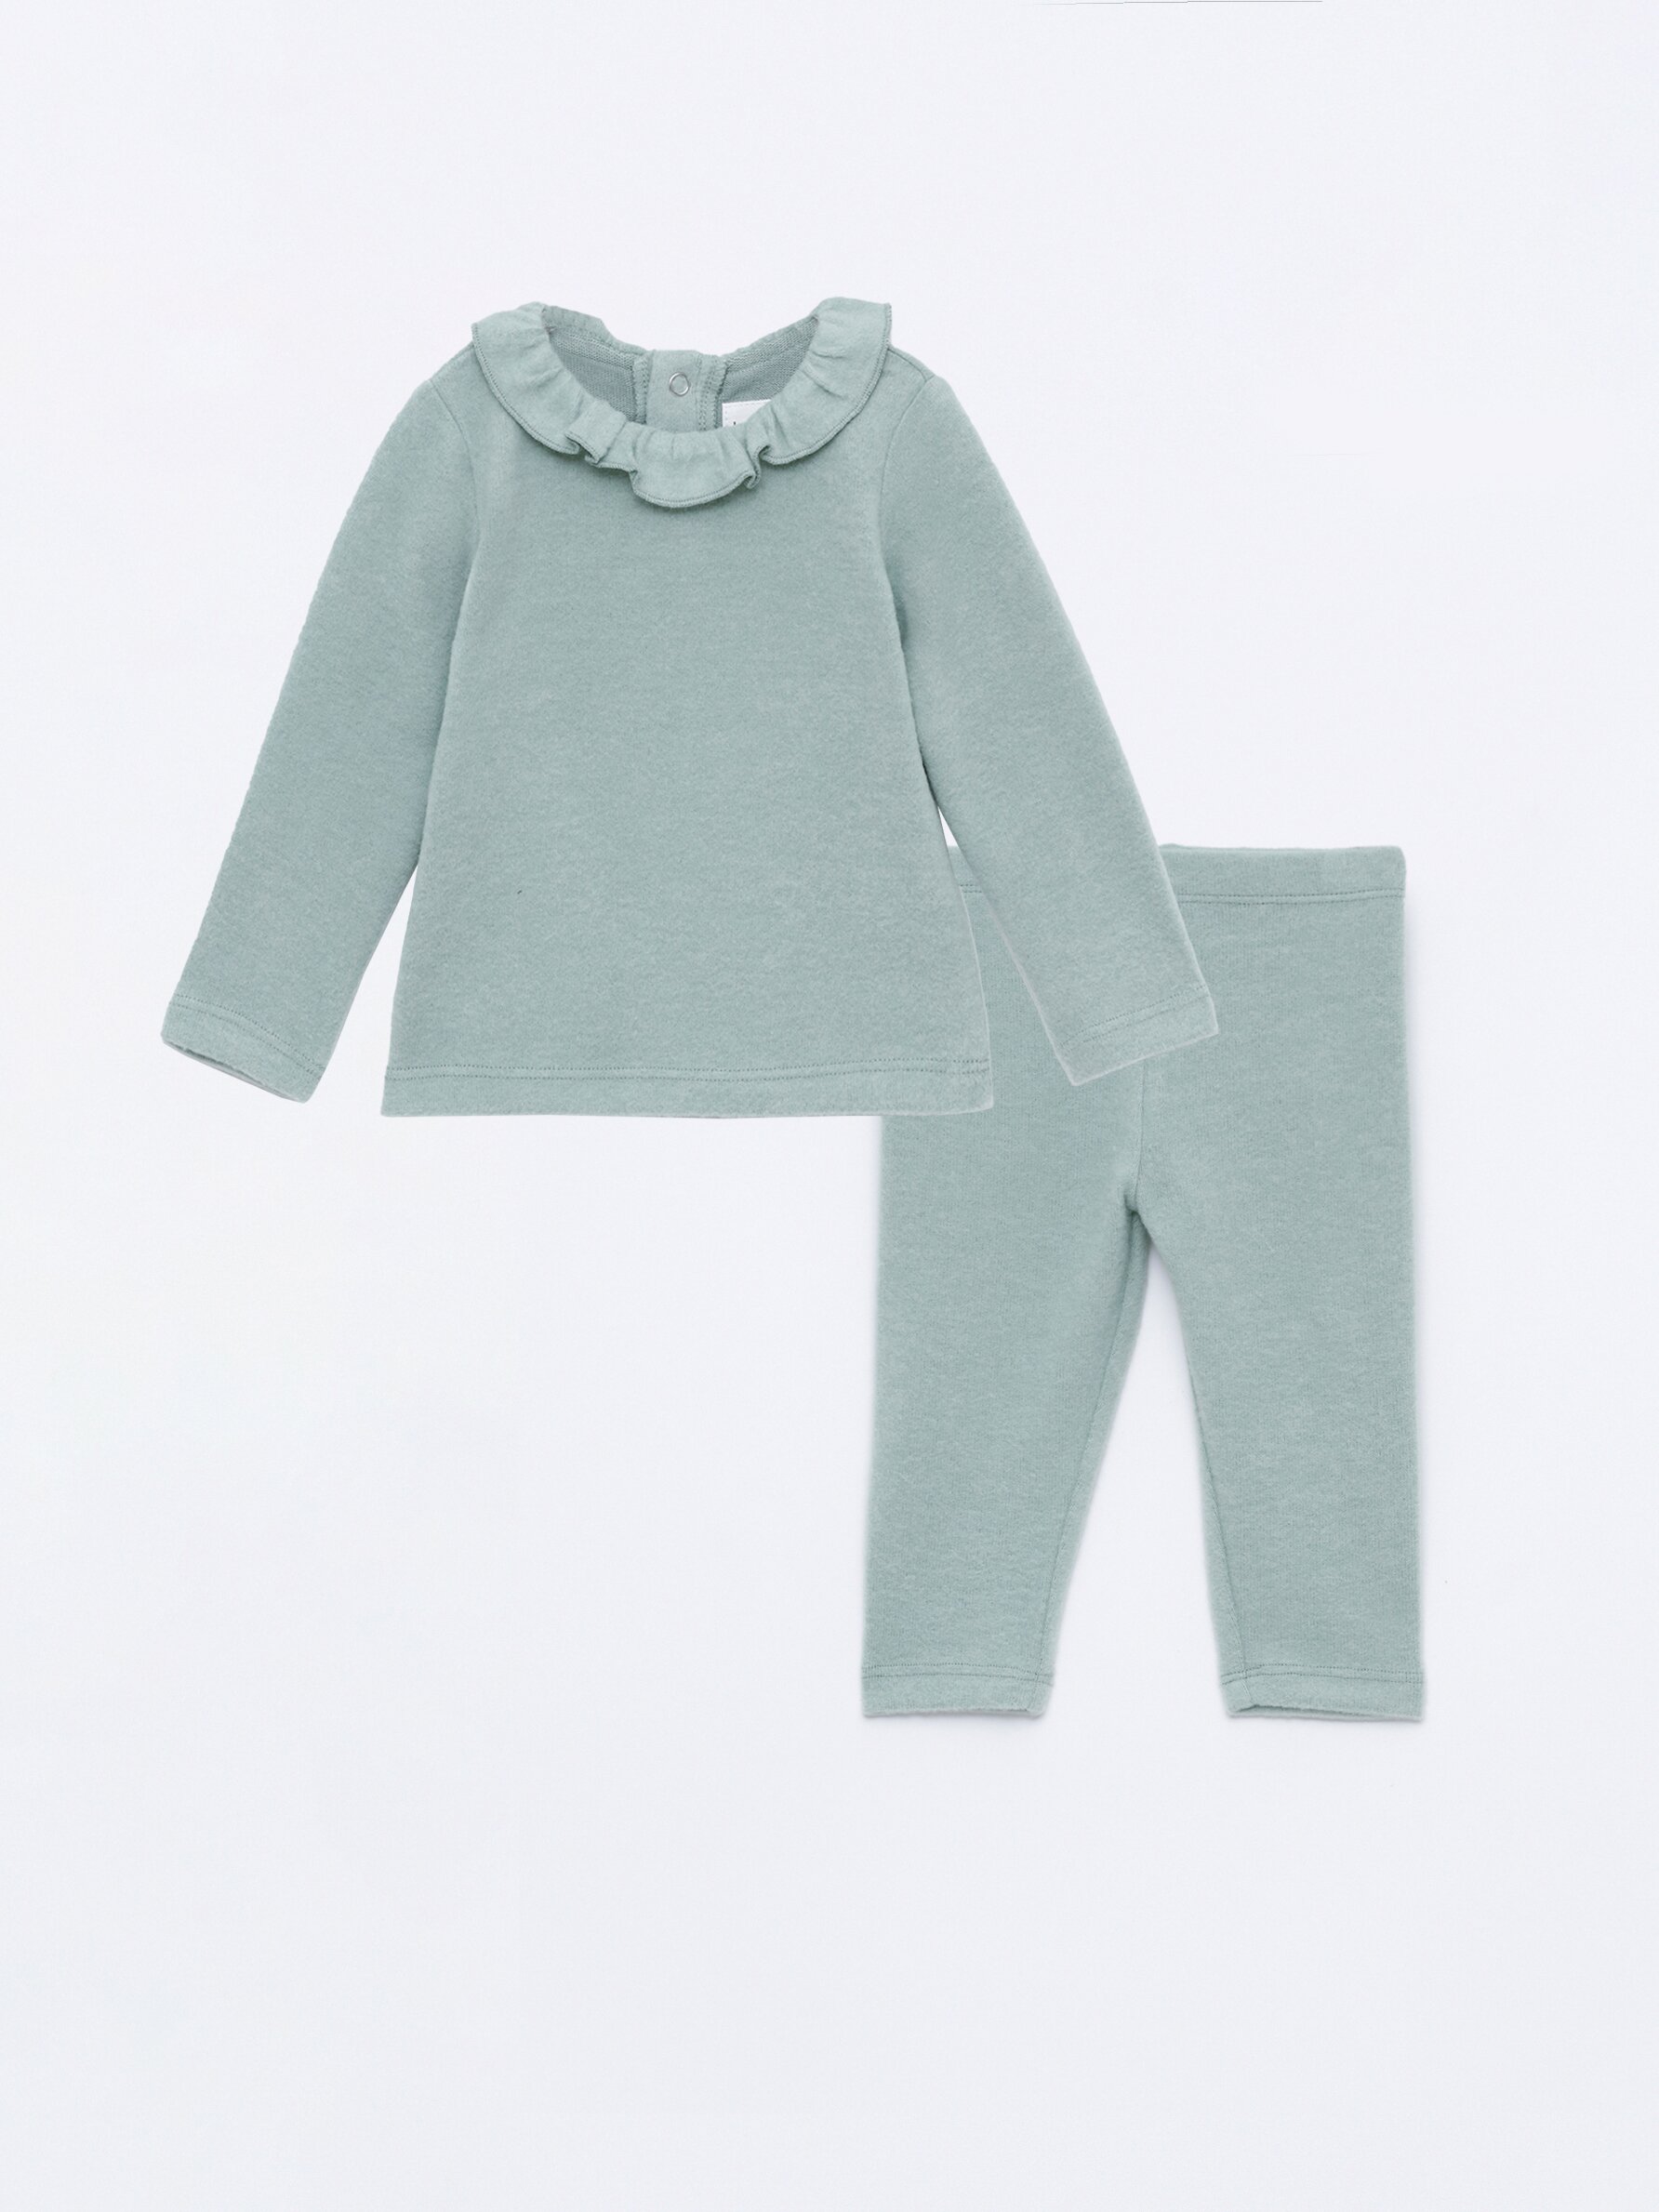 Knit sweater with ruffle trim and leggings co-ord - SETS - Newborn - Kids 